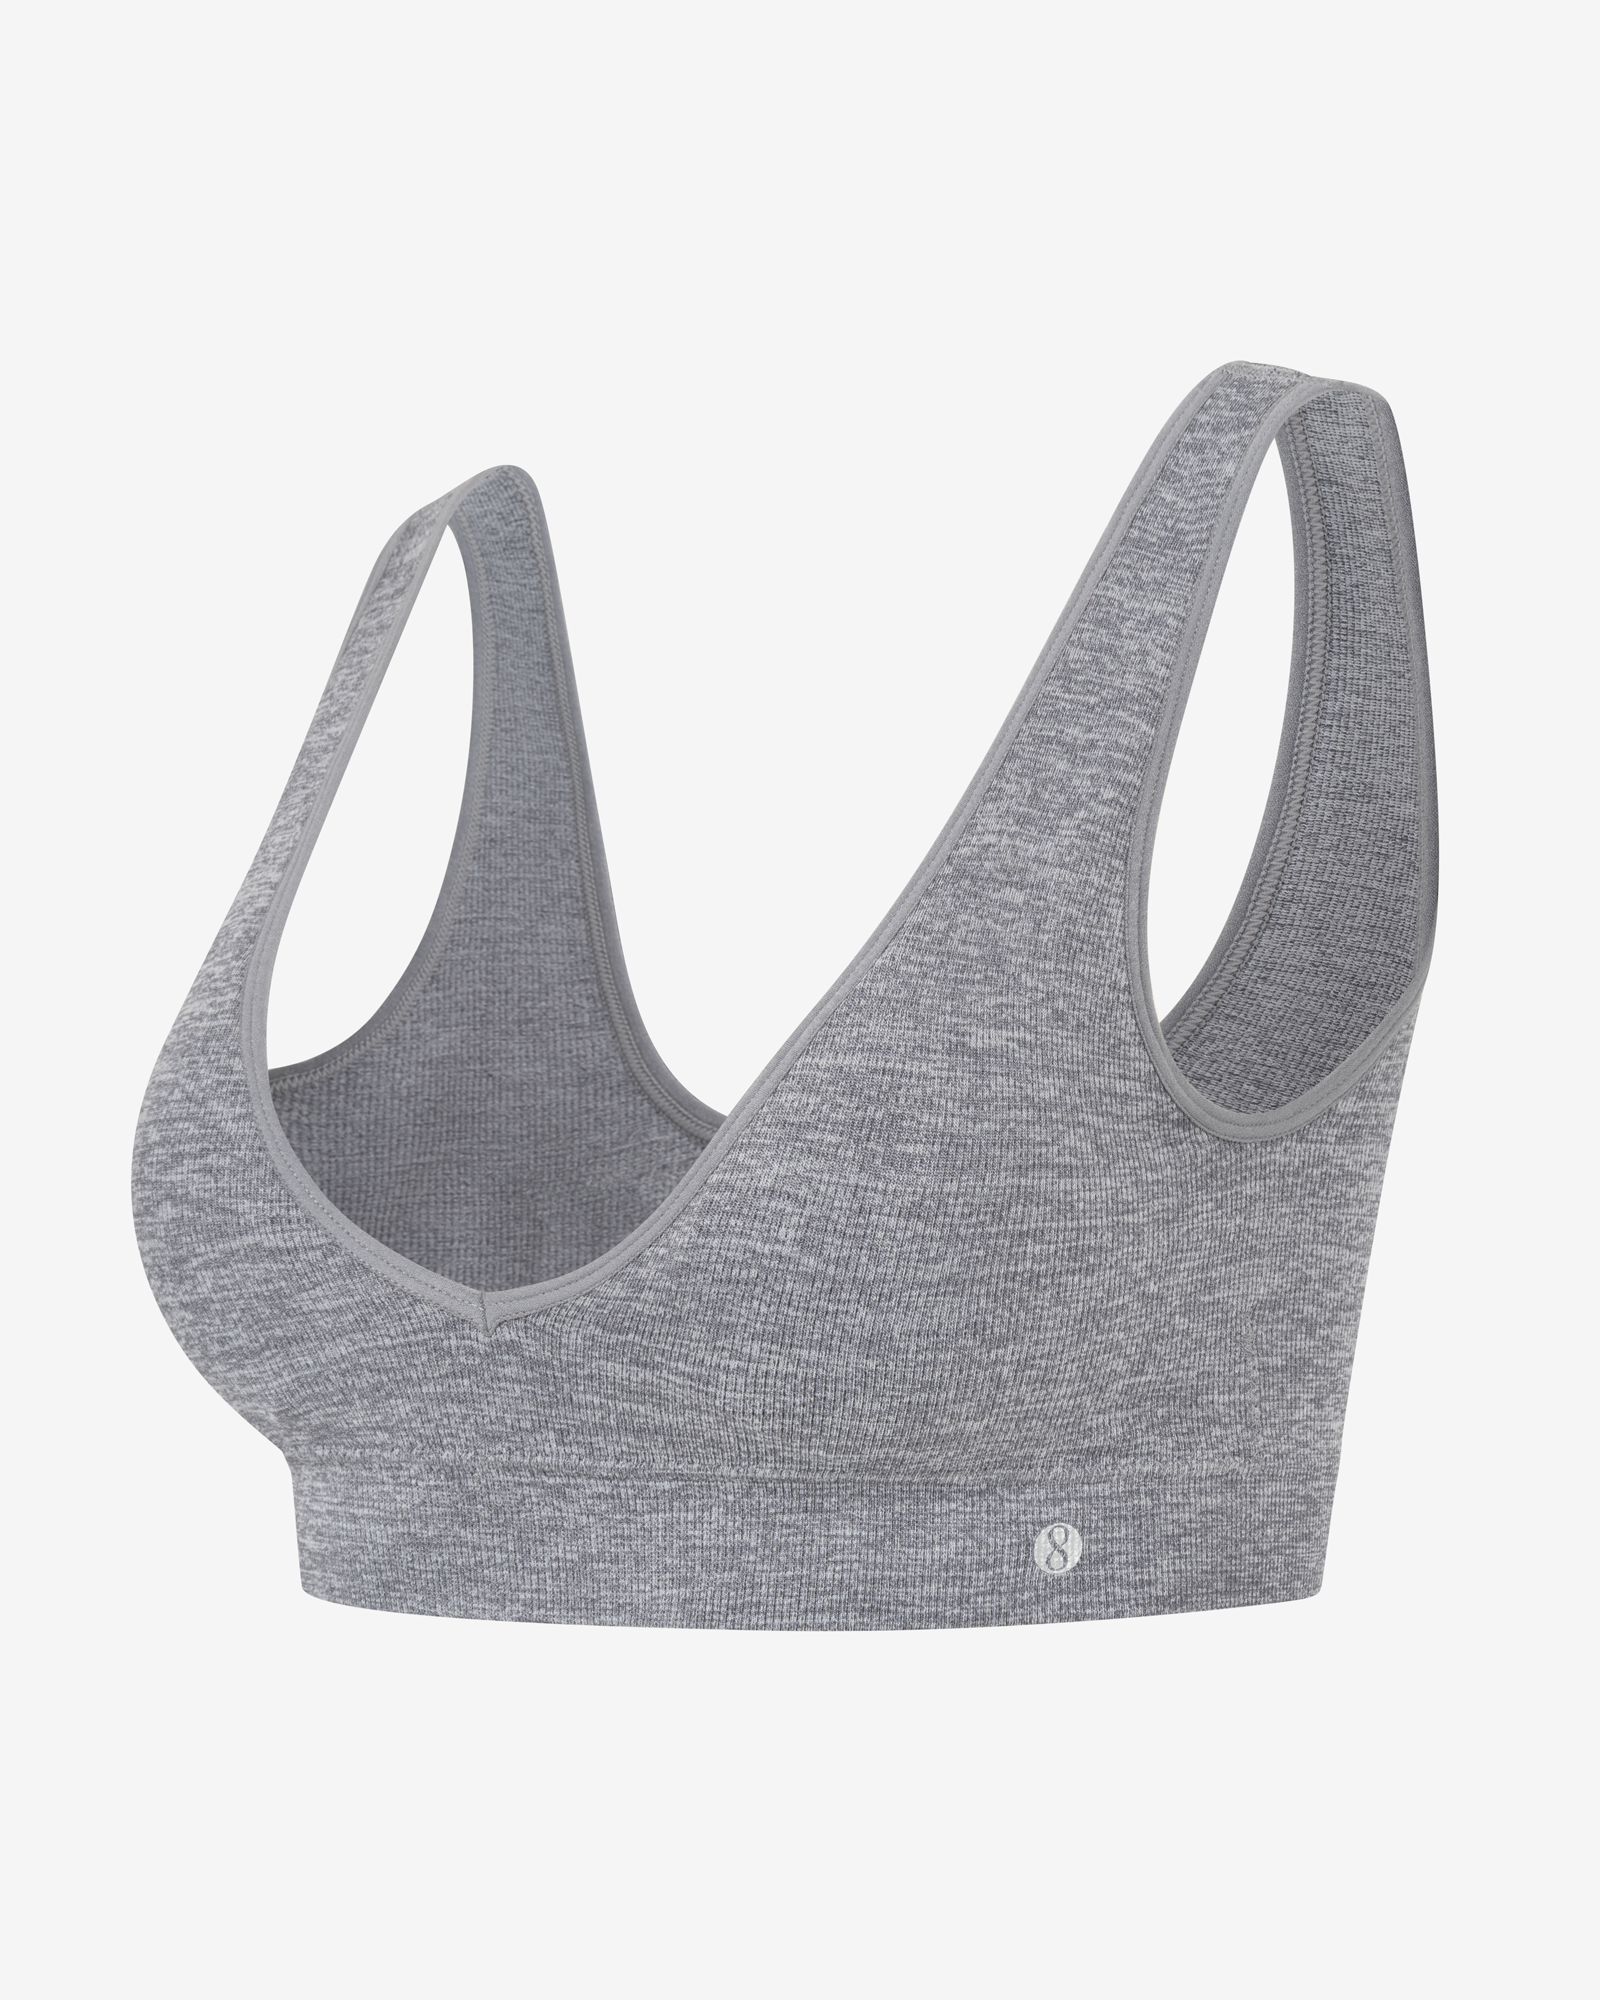 LAYER 8 MAX SUPPORT SIZE 1X XL Sports Bra HEATHER GRAY Fitted Front Zipper  NEW